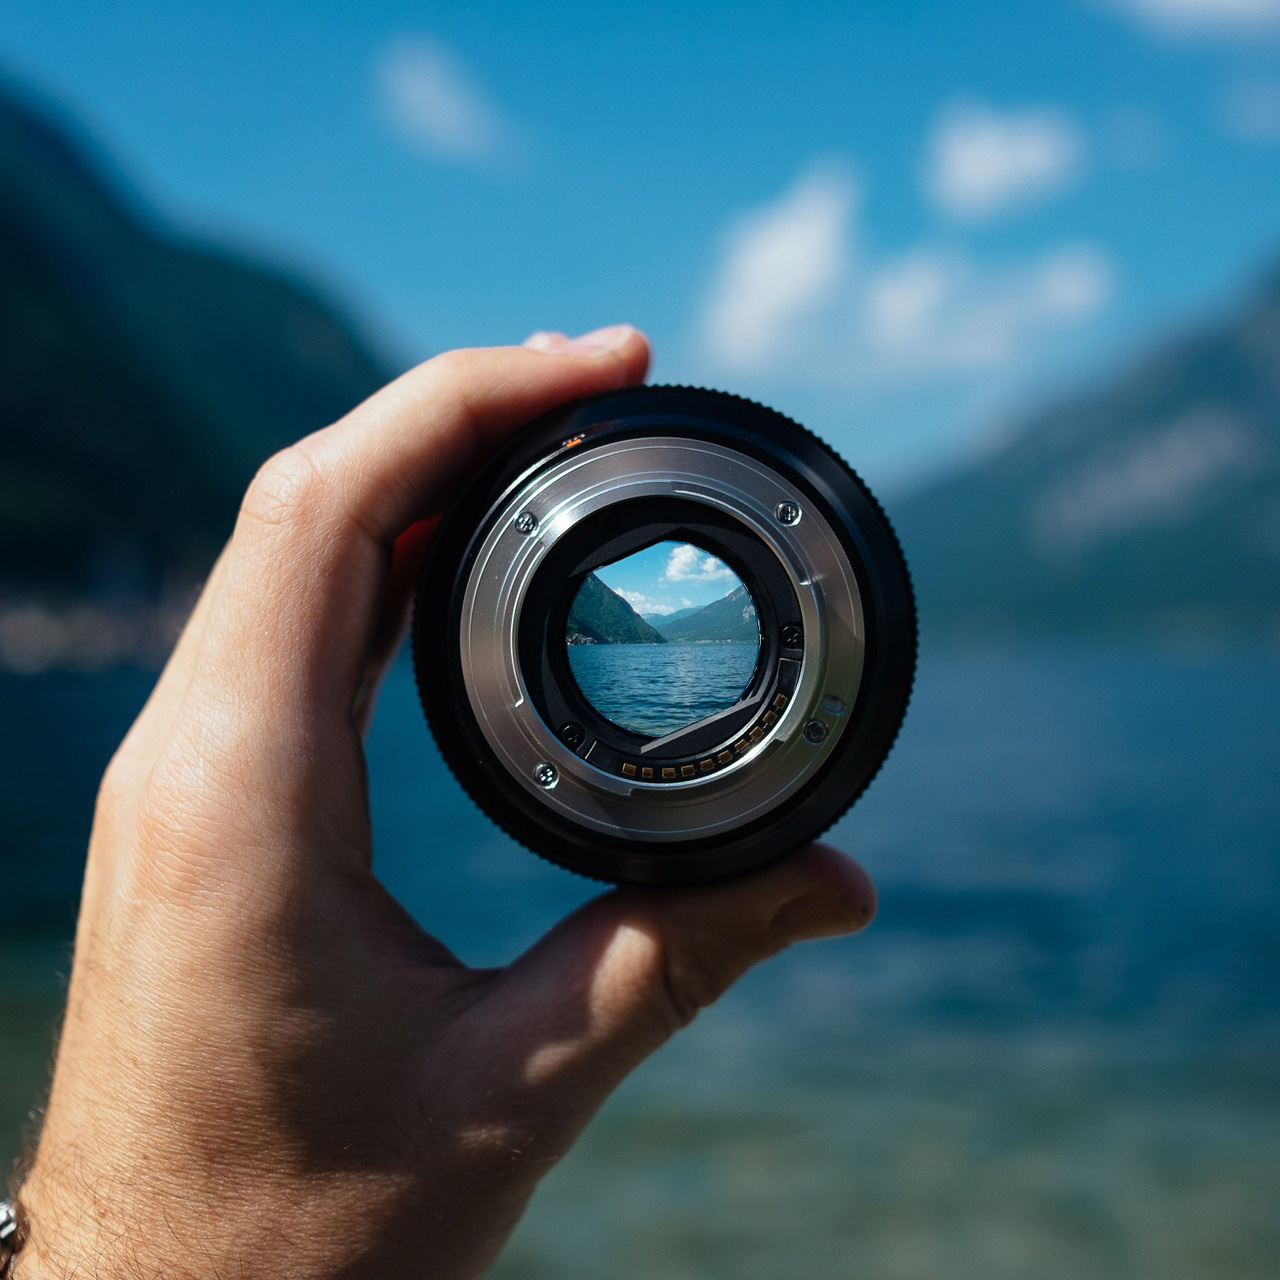 A hand holds a camera lens up in front of a moutain and lake view.